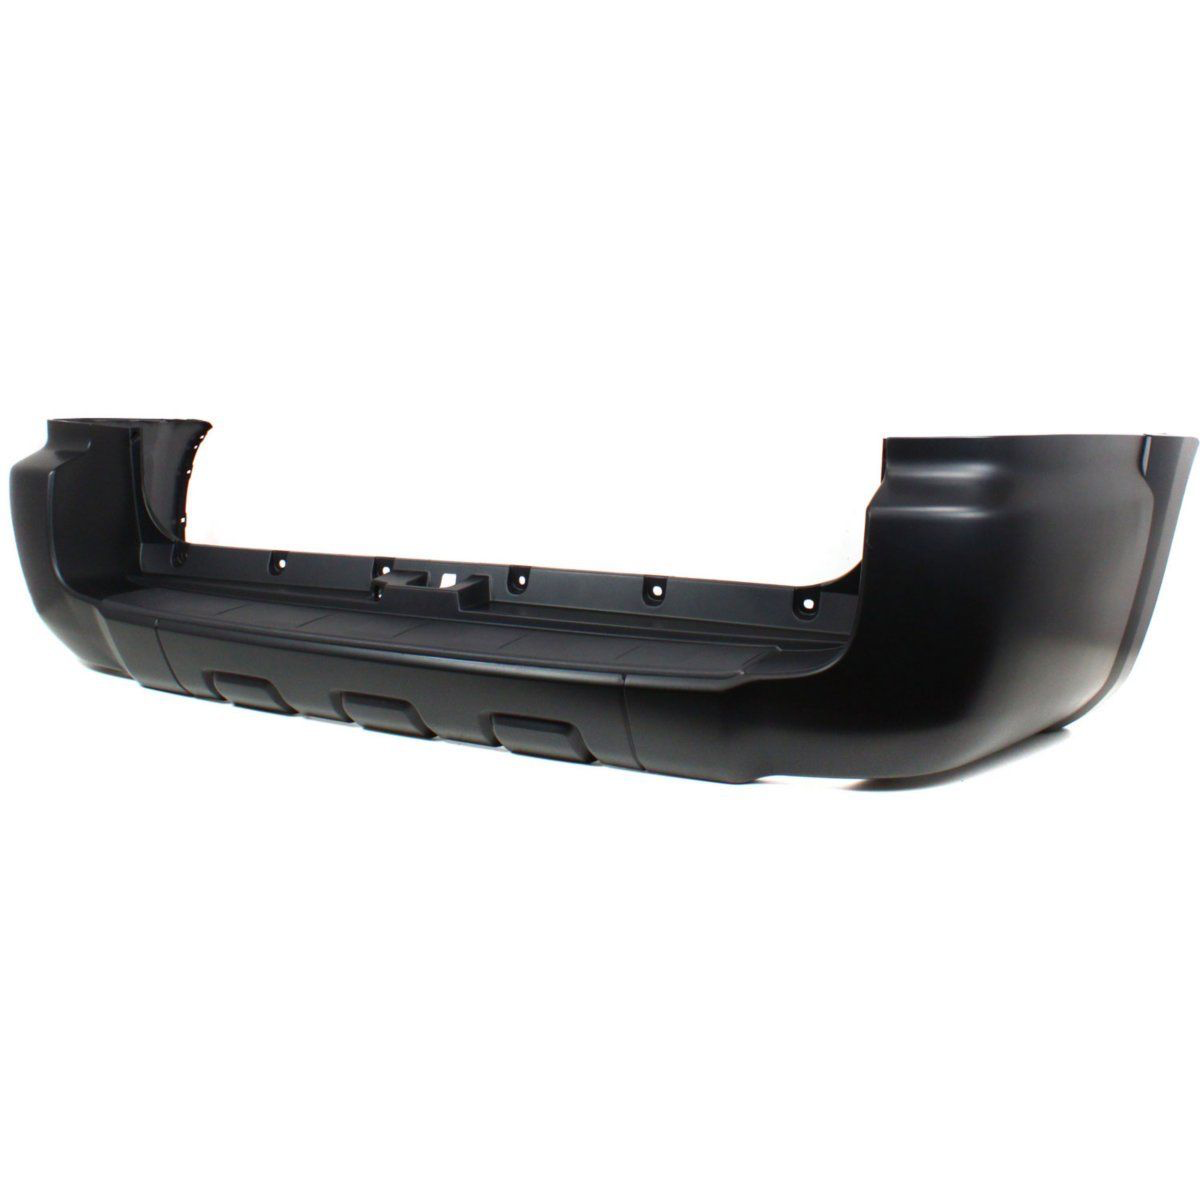 2006-2009 TOYOTA 4RUNNER Rear Bumper Cover w/o trailer hitch Painted to Match